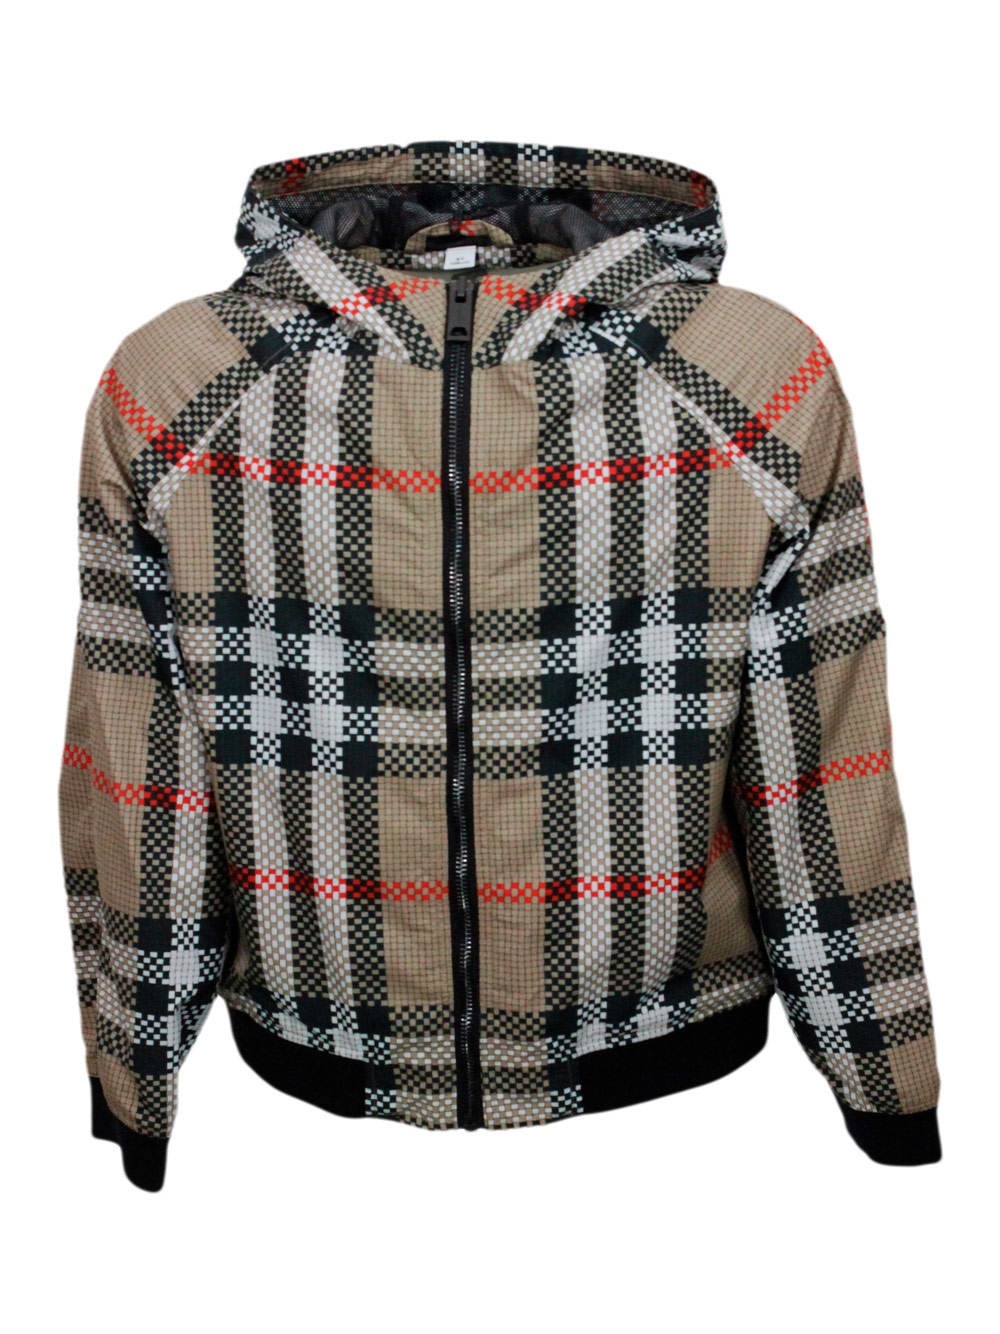 Lightweight Windproof Jacket In Technical Fabric With Hood And Zip Closure In Burberry New Check